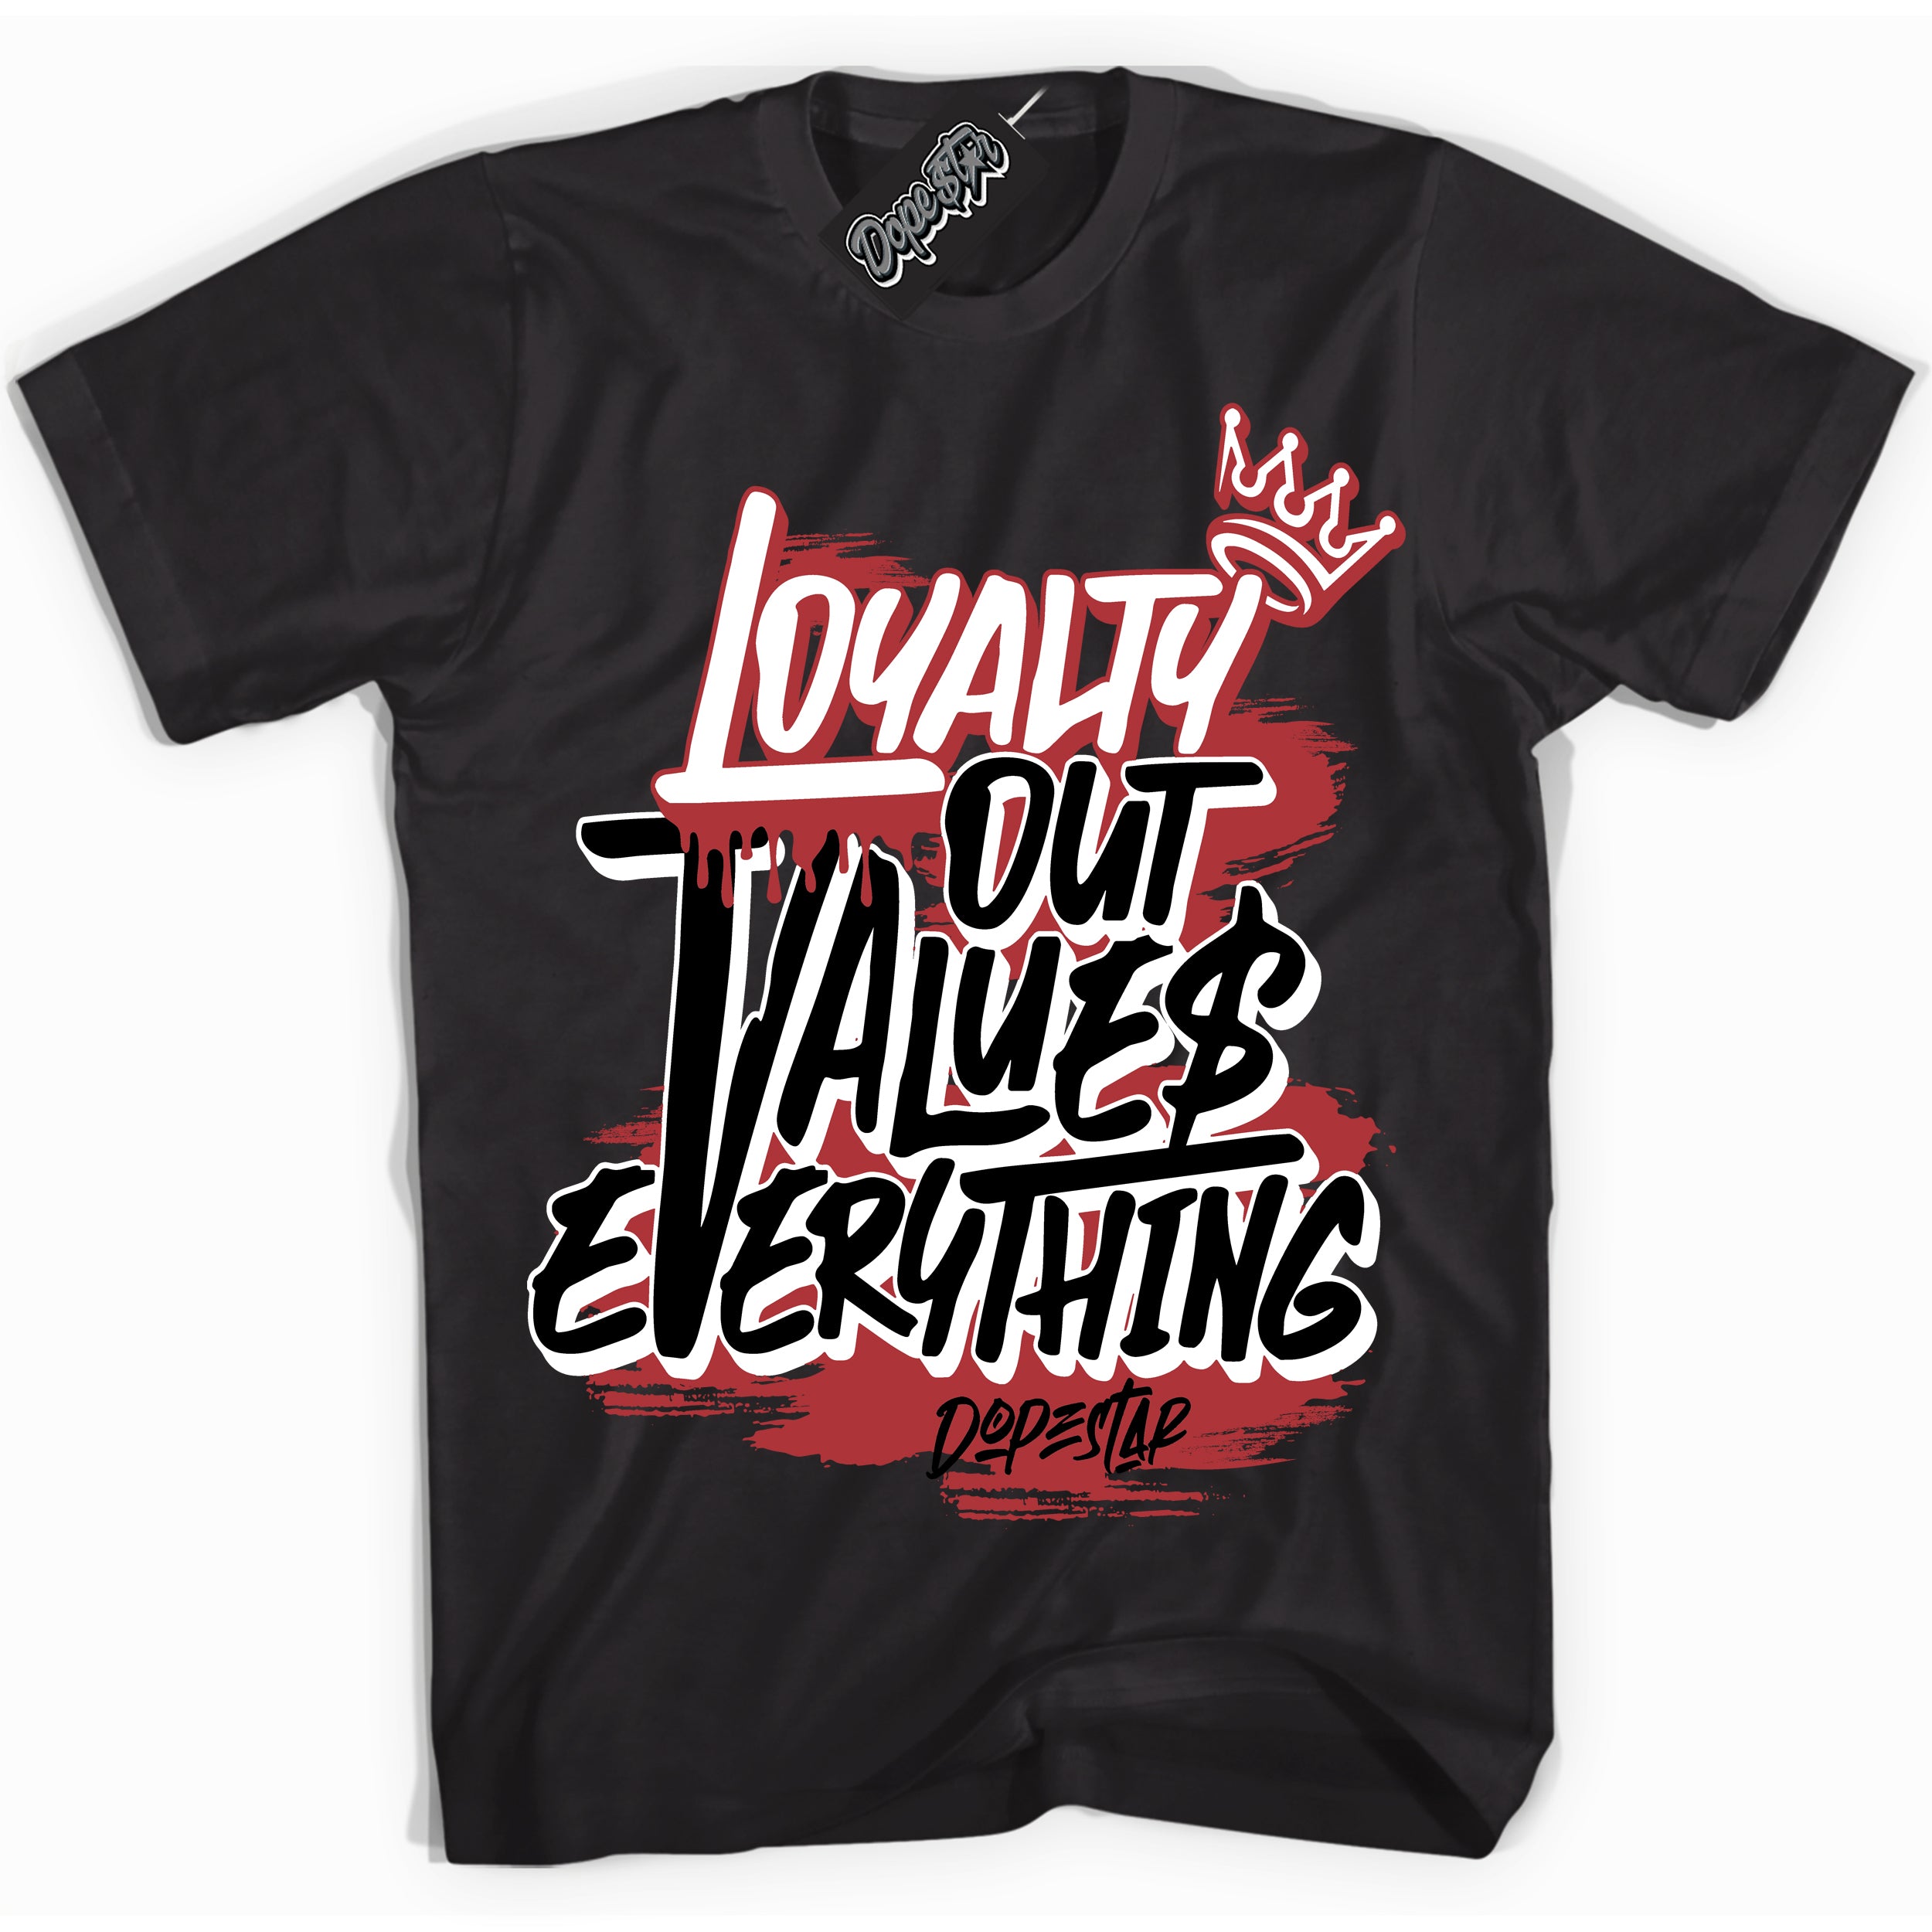 Cool Black Shirt with “ Loyalty Out Values Everything” design that perfectly matches Chicago 2s Sneakers.